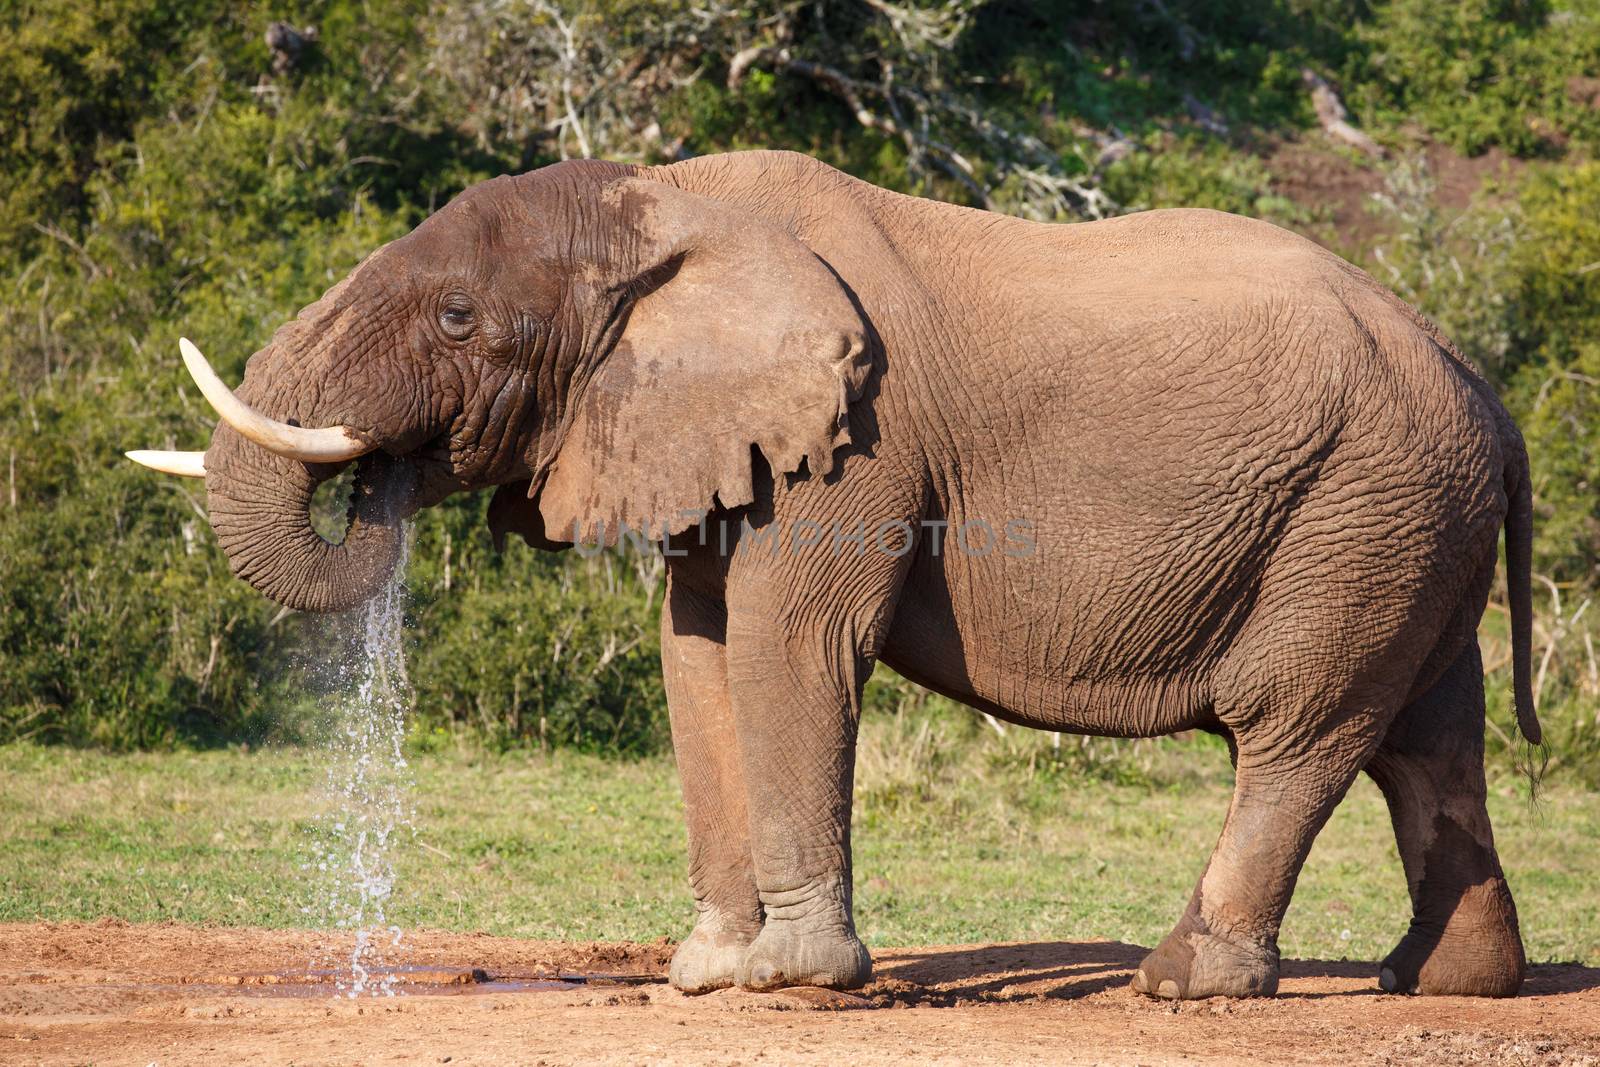 Large male African elephant spraying  water from its trunk as it drinks